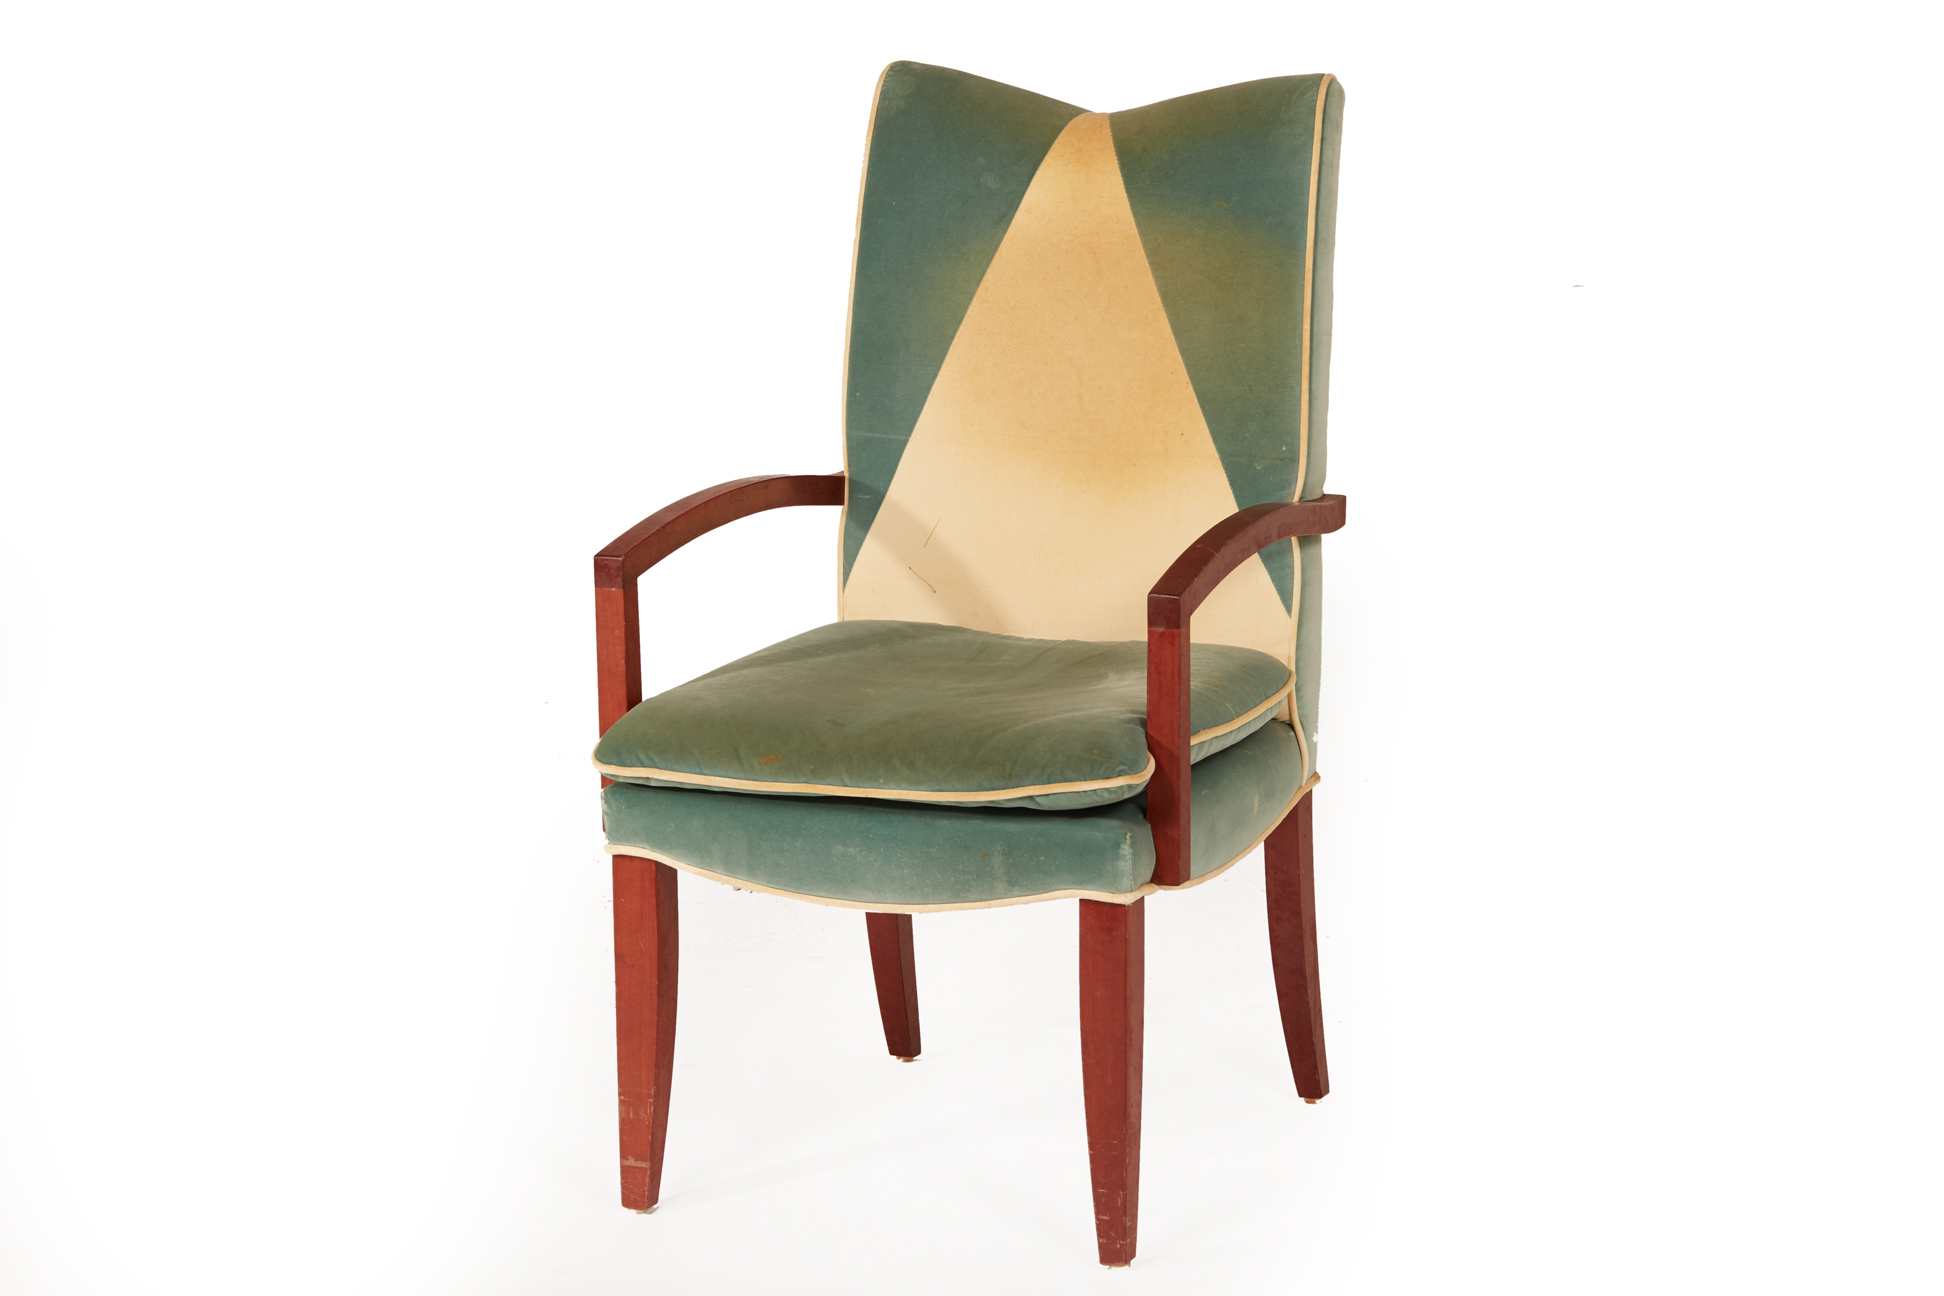 AN ART DECO STYLE UPHOLSTERED OPEN ARMCHAIR